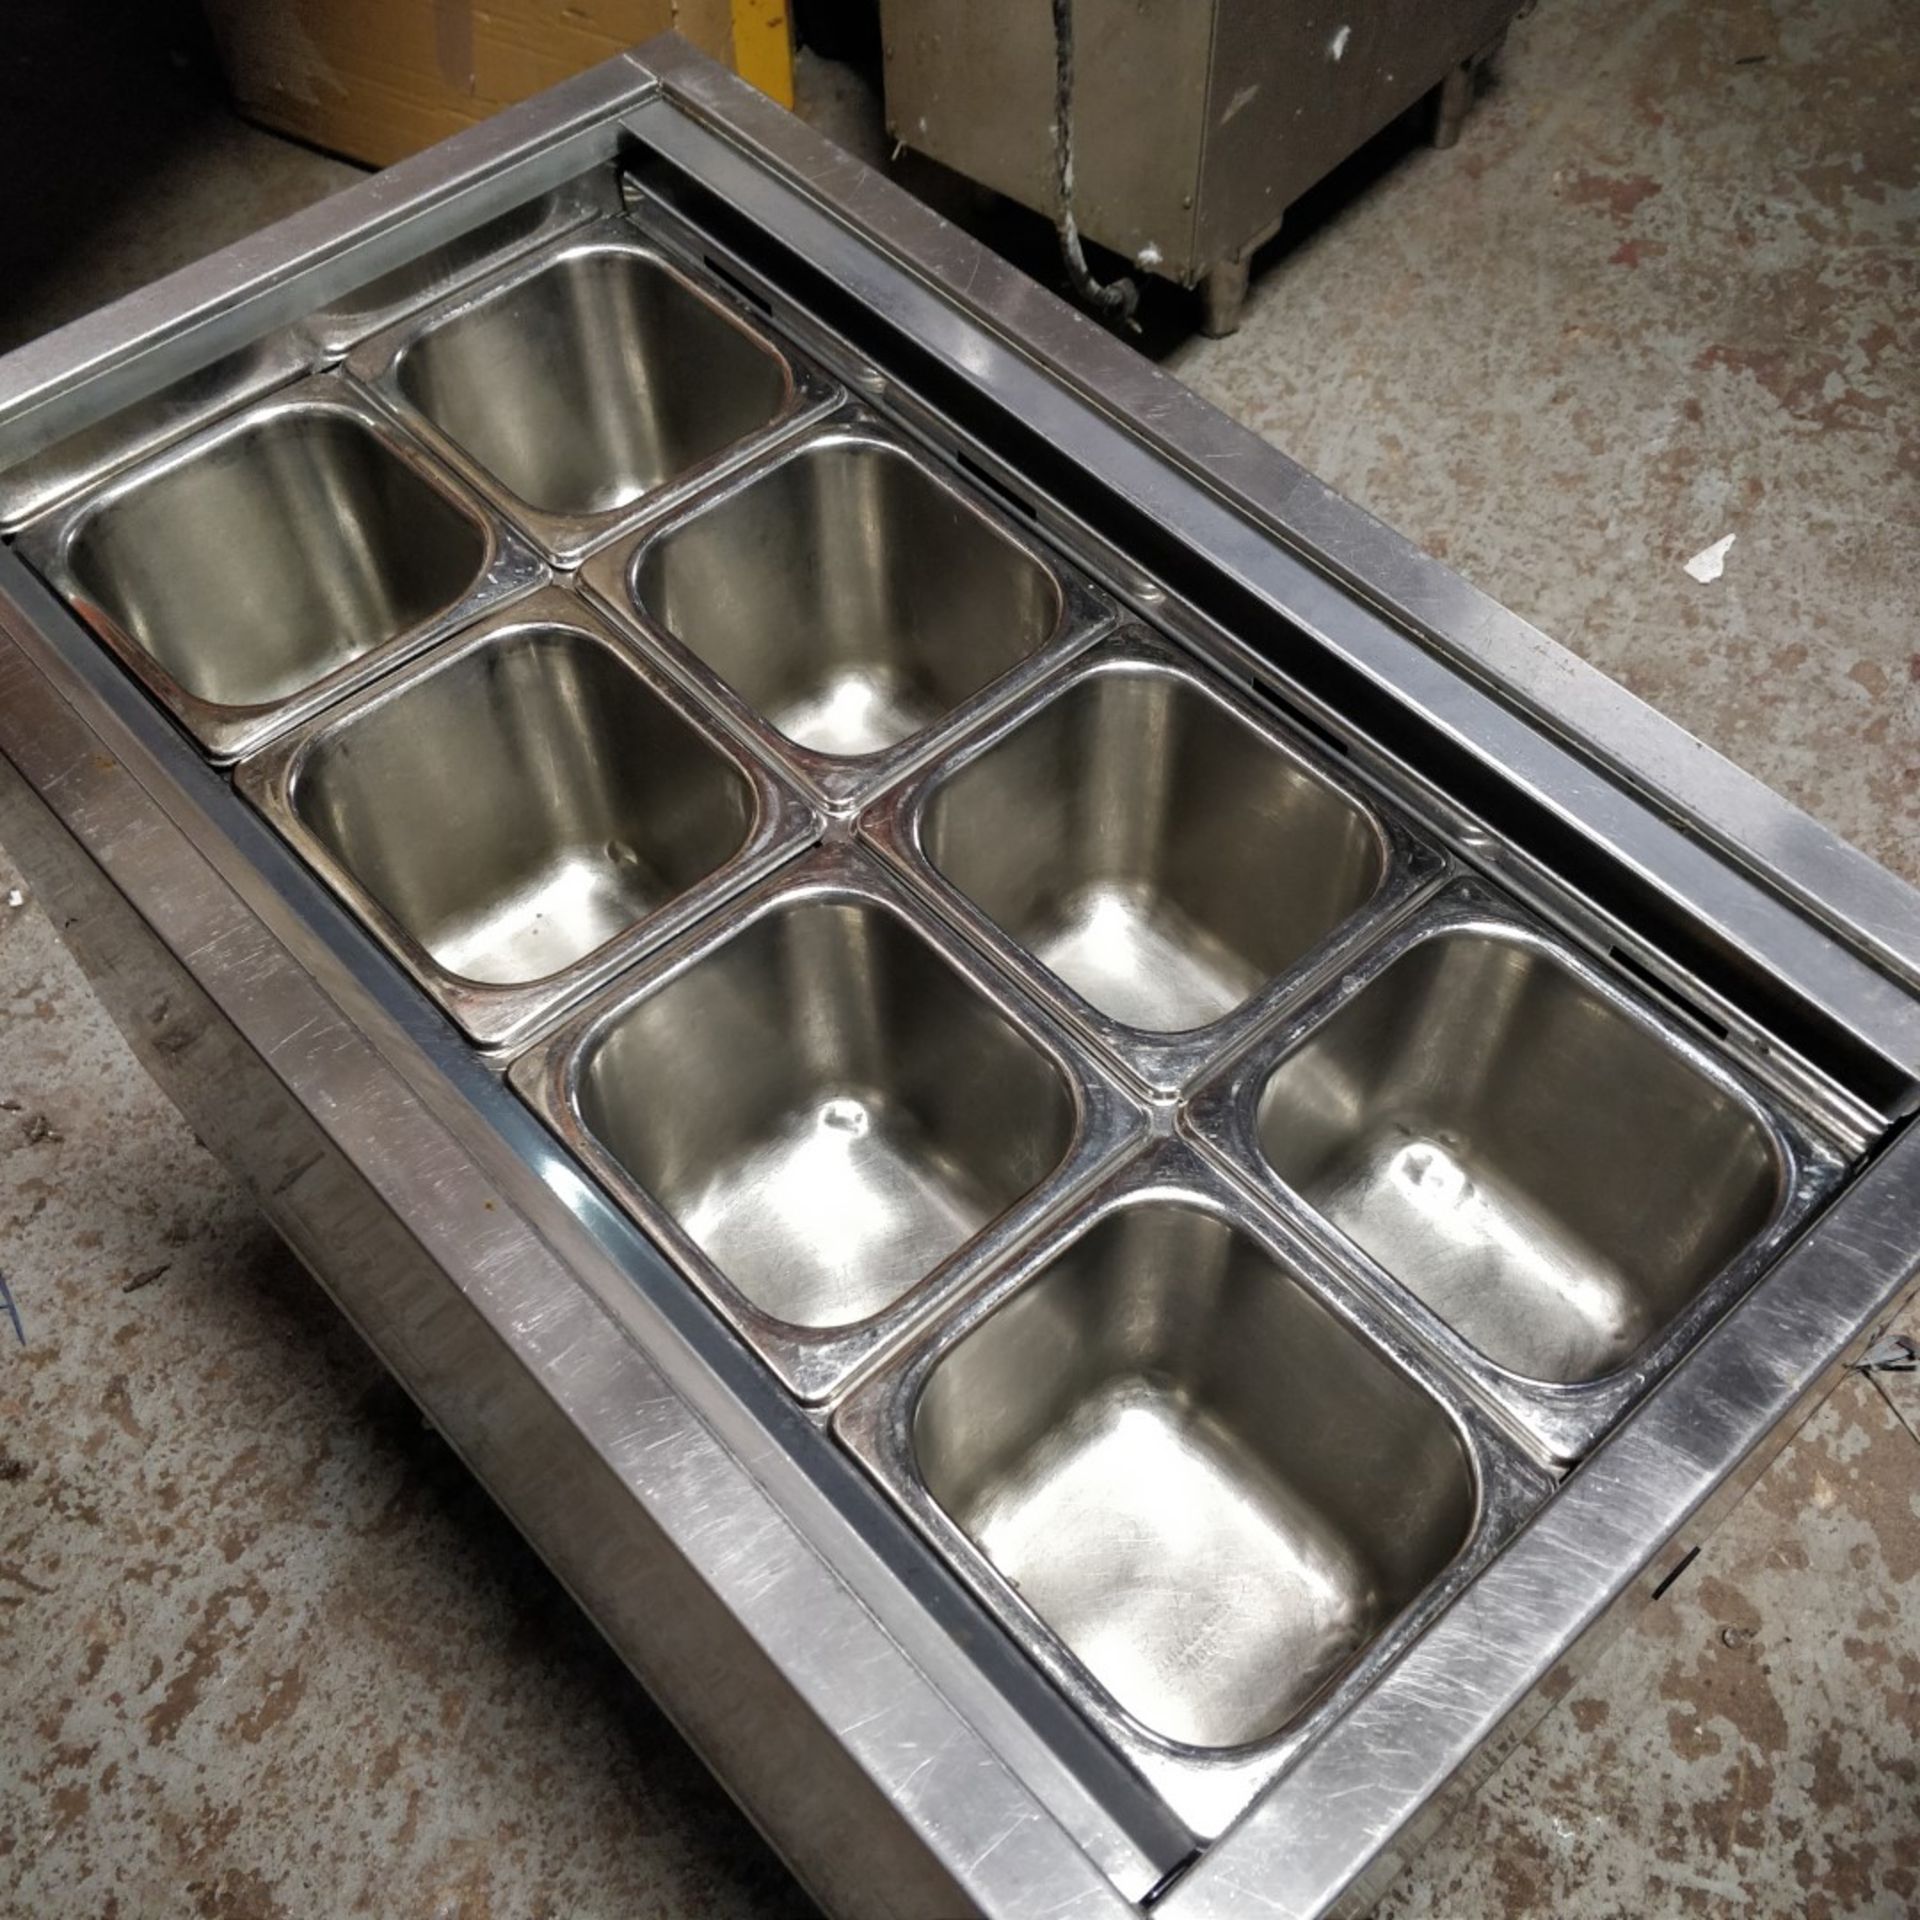 1 x Williams Refrigerated Counter Prep Well With Gastro Pans and Stainless Steel Finish - 240v UK - Image 4 of 8